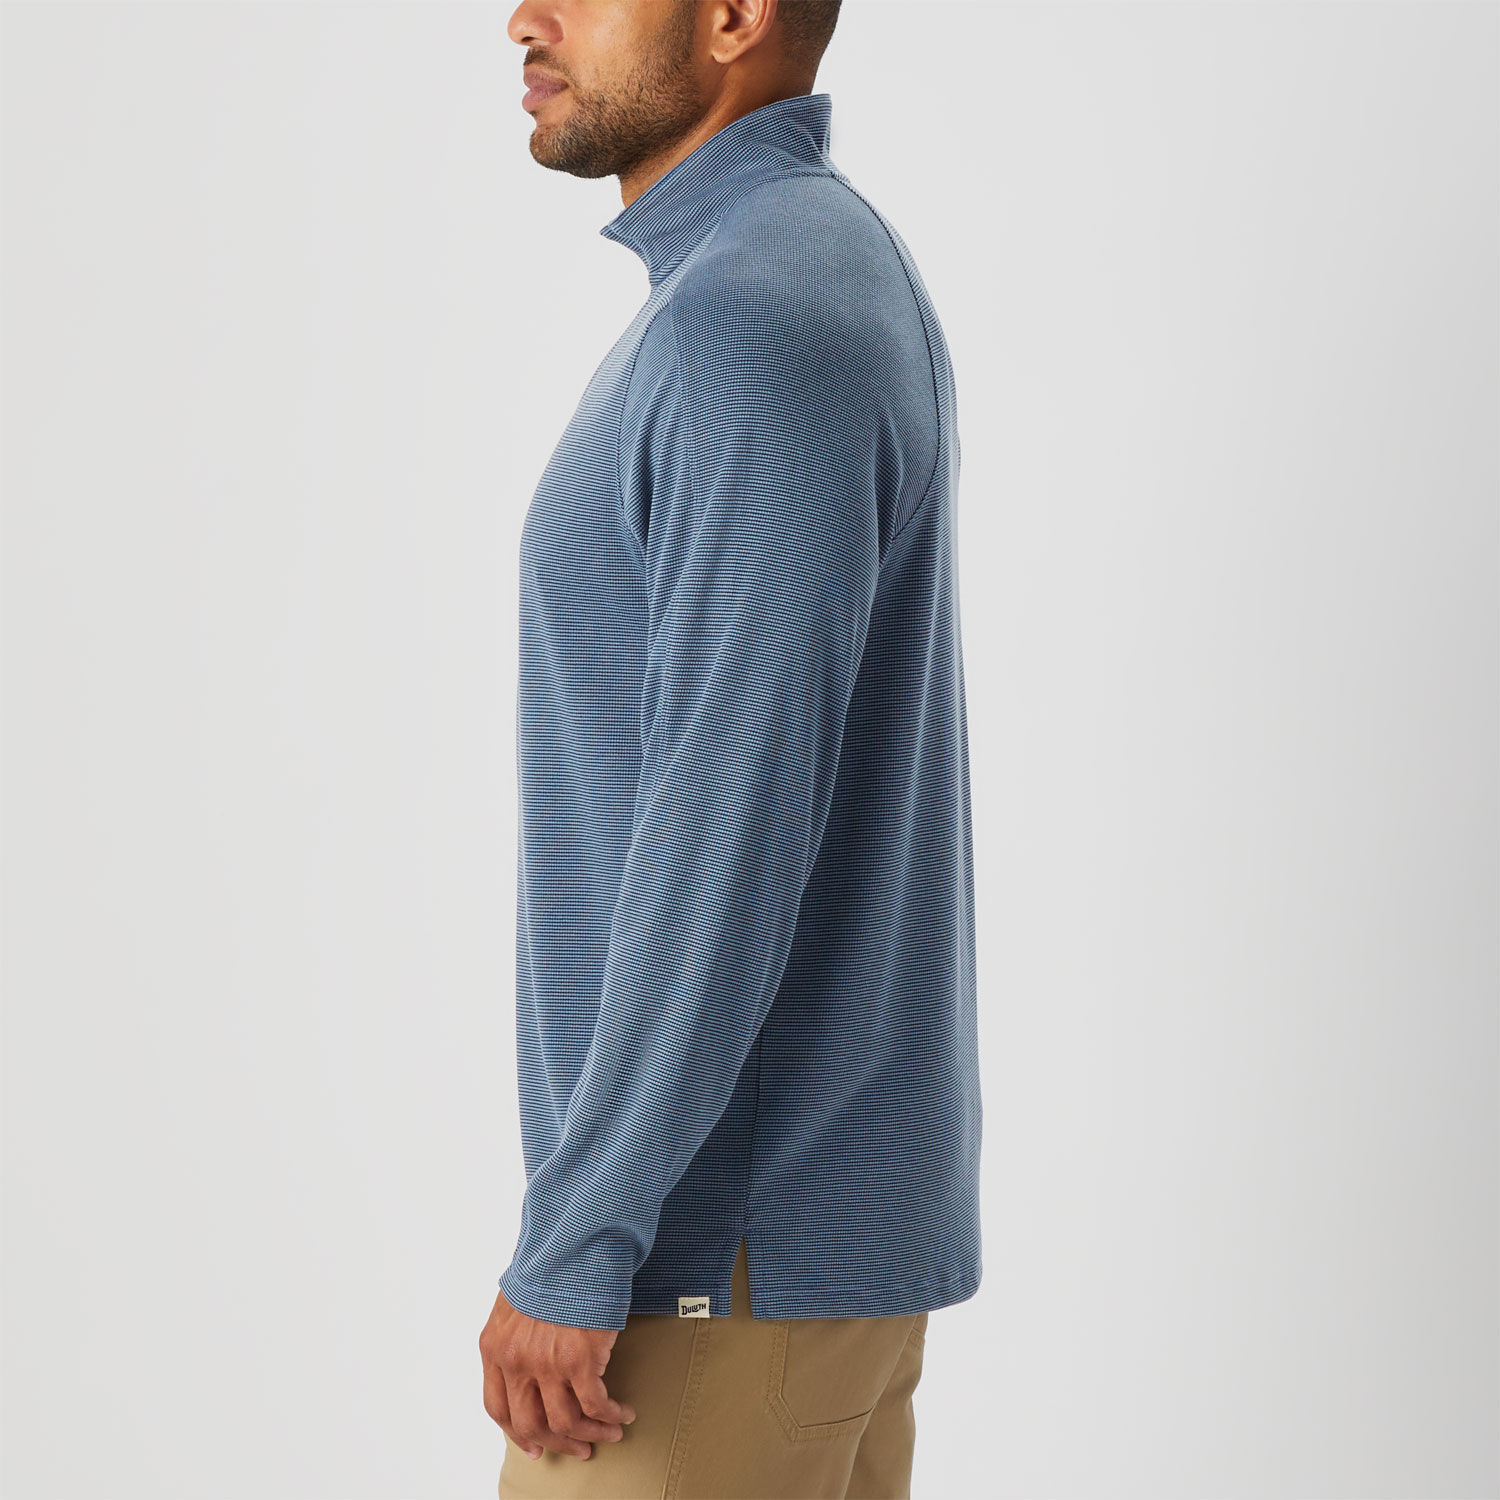 Men's Knuckledown ¼ Zip Long Sleeve Pullover | Duluth Trading Company